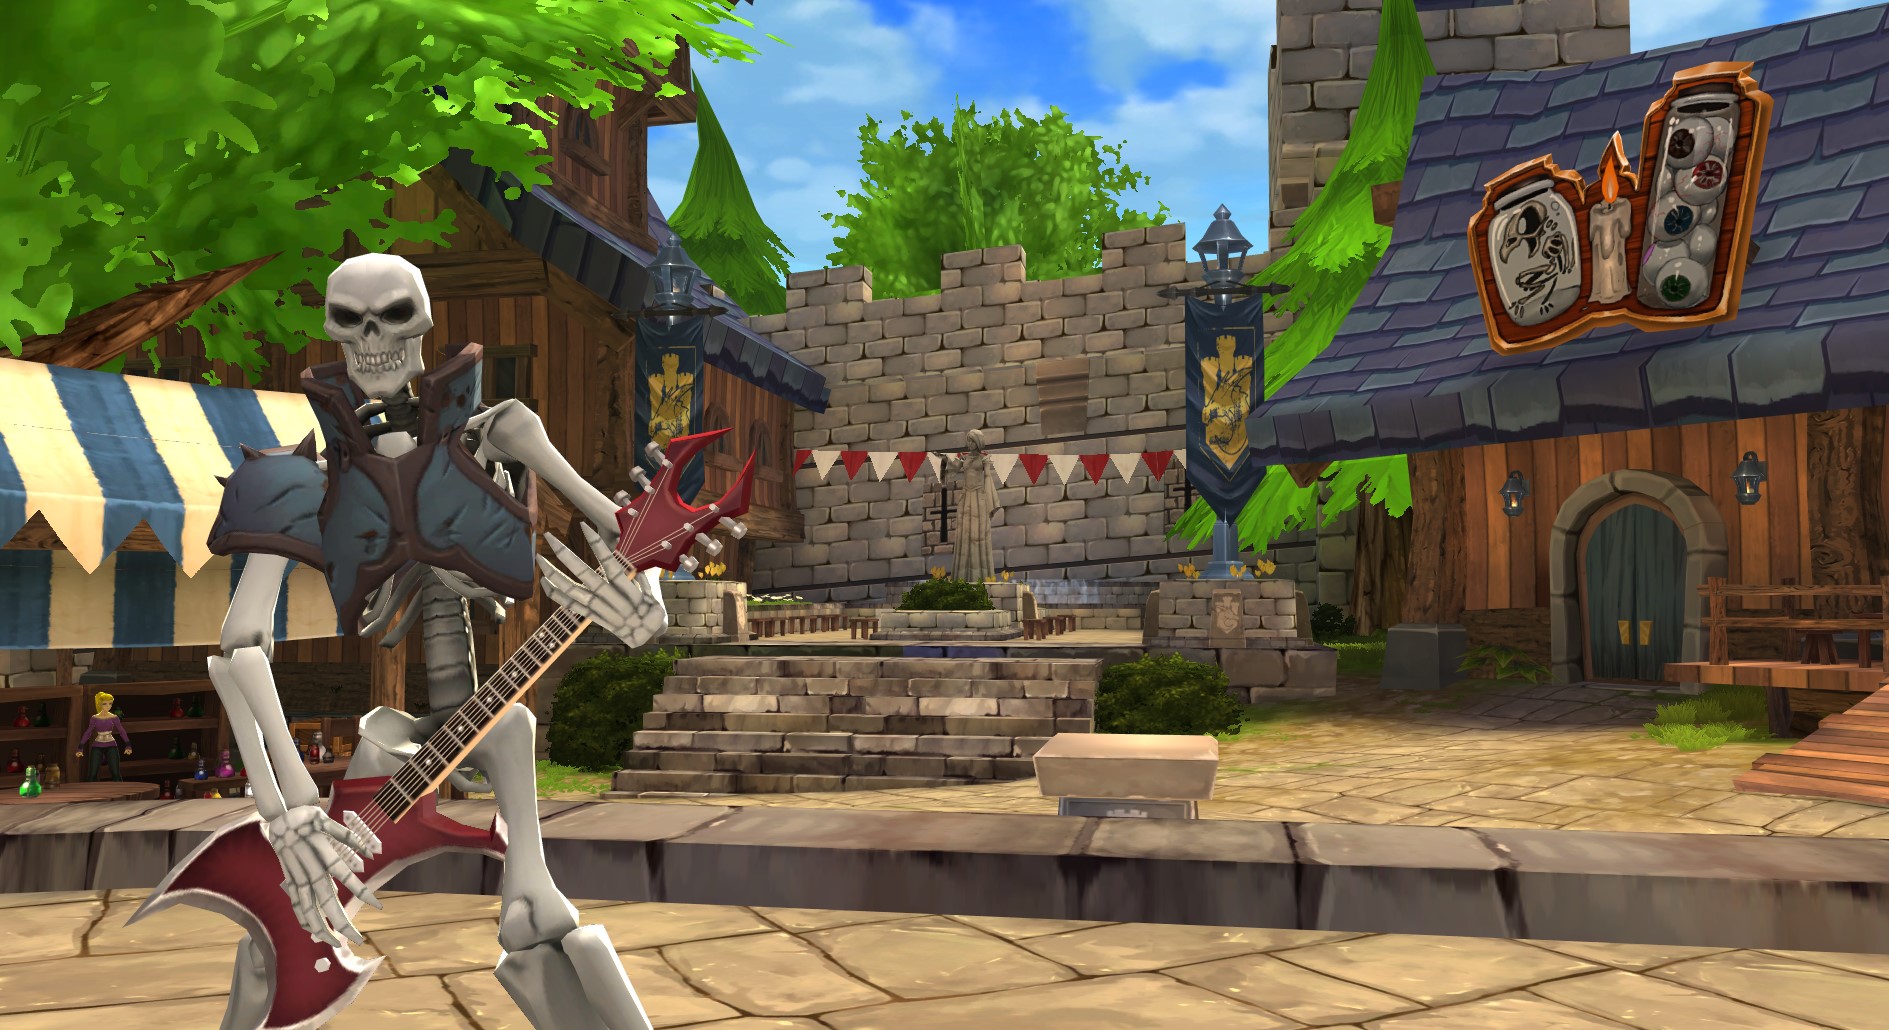 Hang out at Battleon's Social District